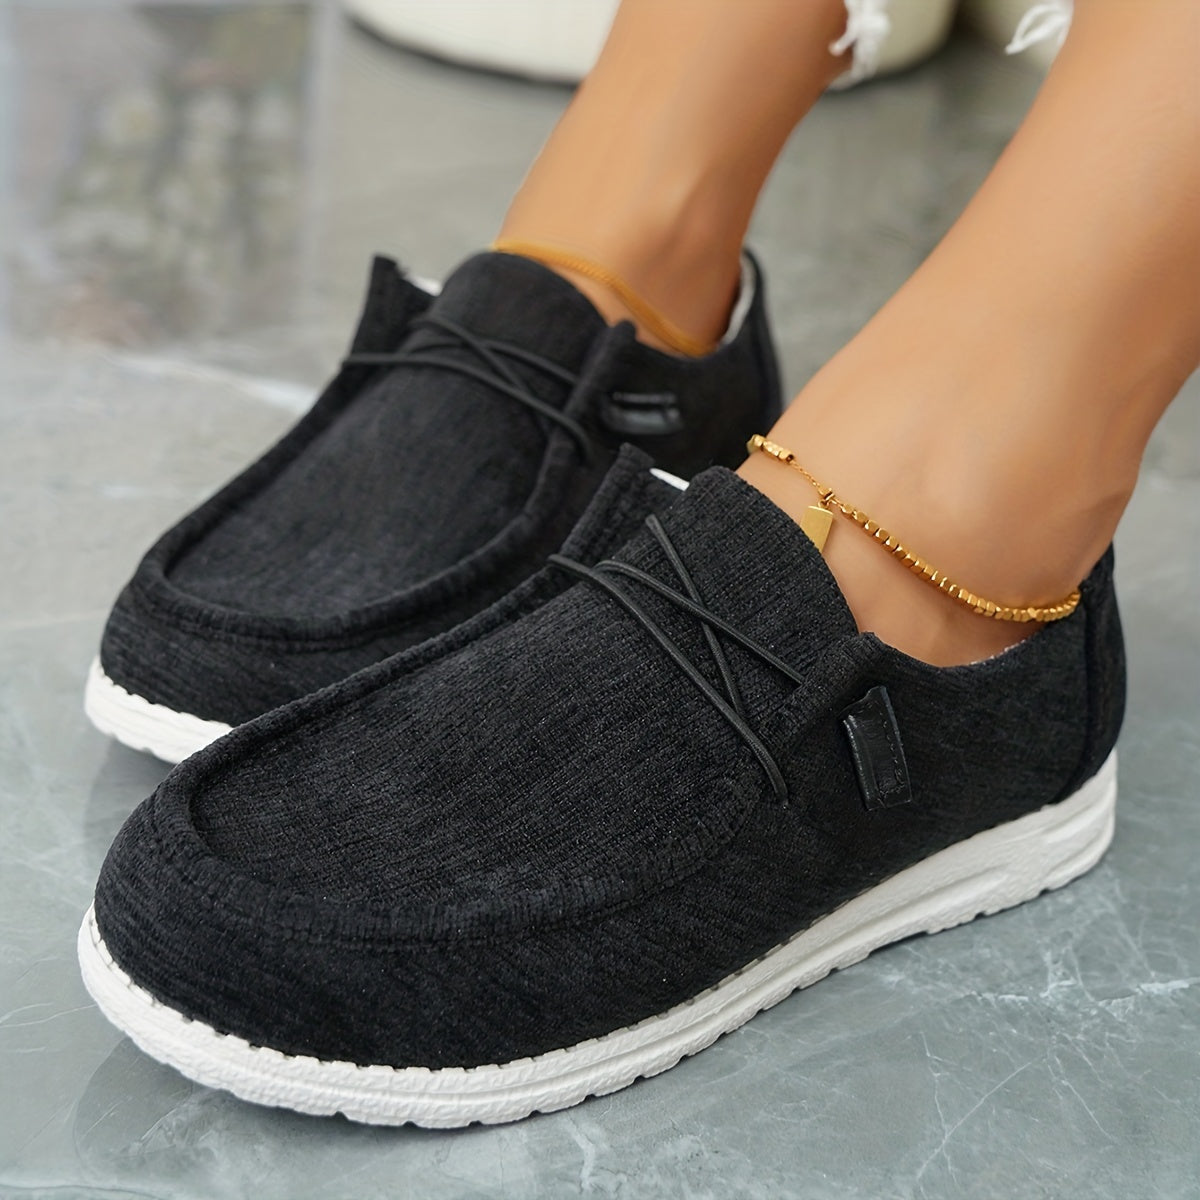 Women's Solid Color Canvas Shoes, Casual Lace Up Outdoor Shoes, Lightweight Low Top Sneakers